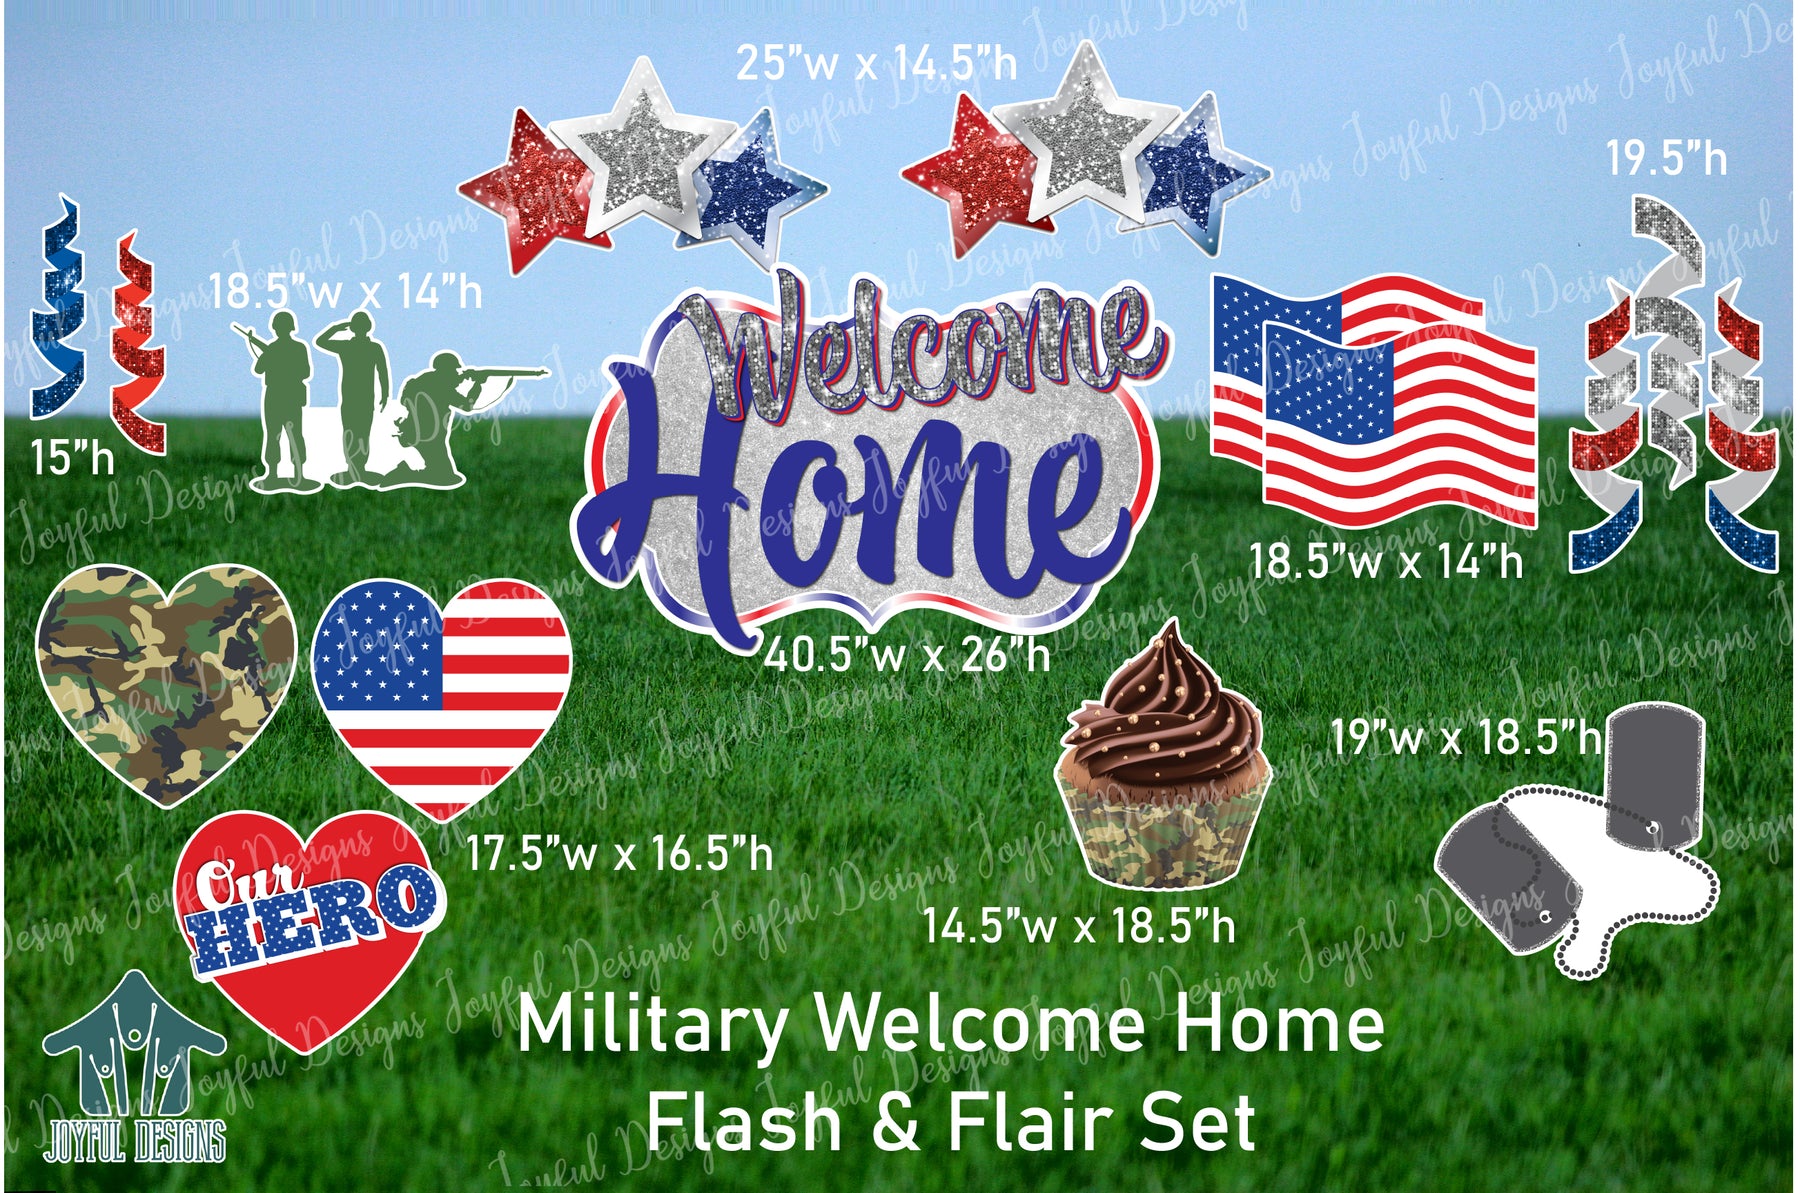 Military Welcome Home Centerpiece and Flair